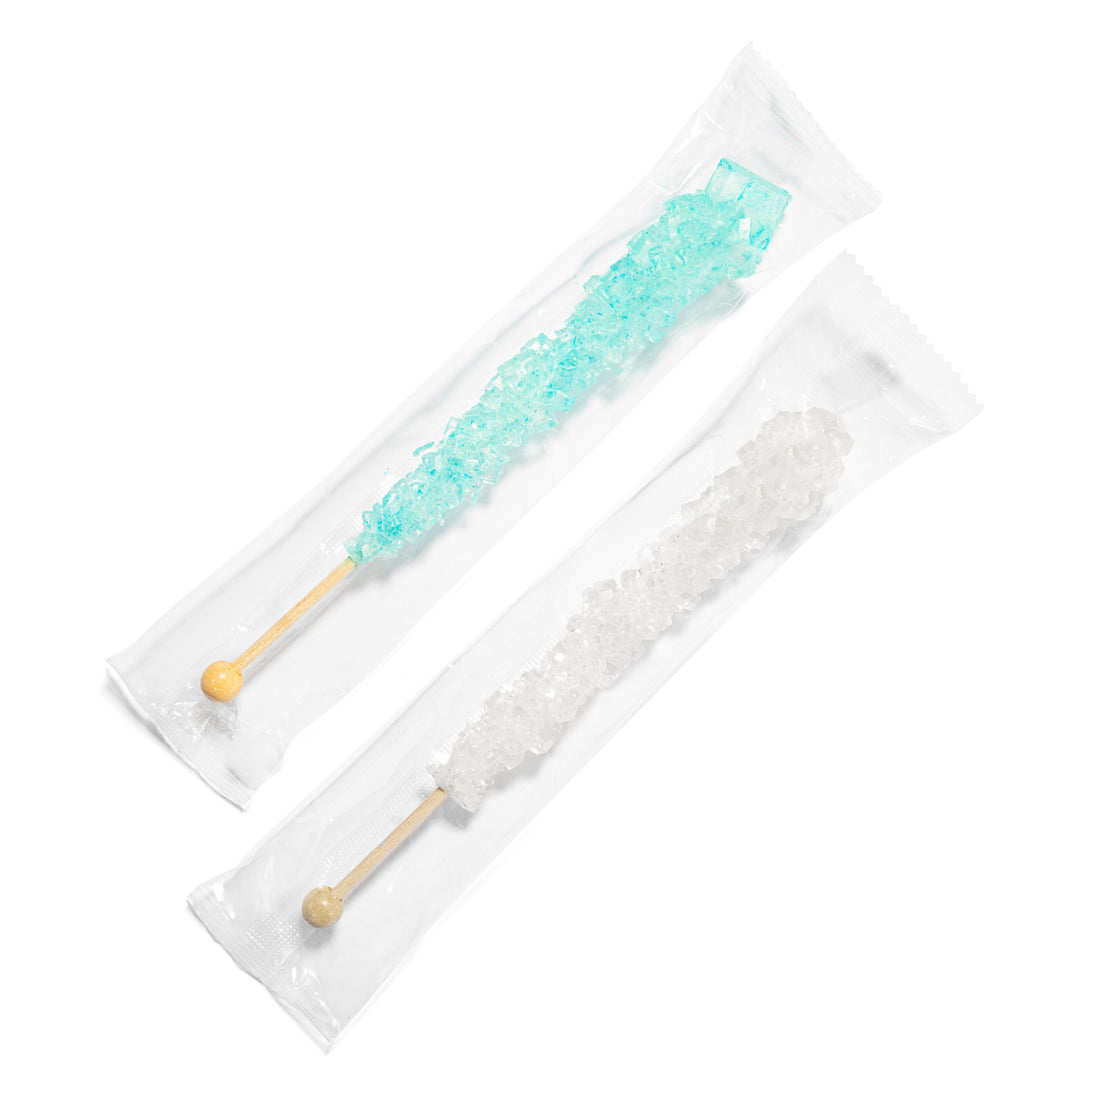 Light Blue & White Rock Candy Sticks - Cotton Candy and Origin – Candy Envy